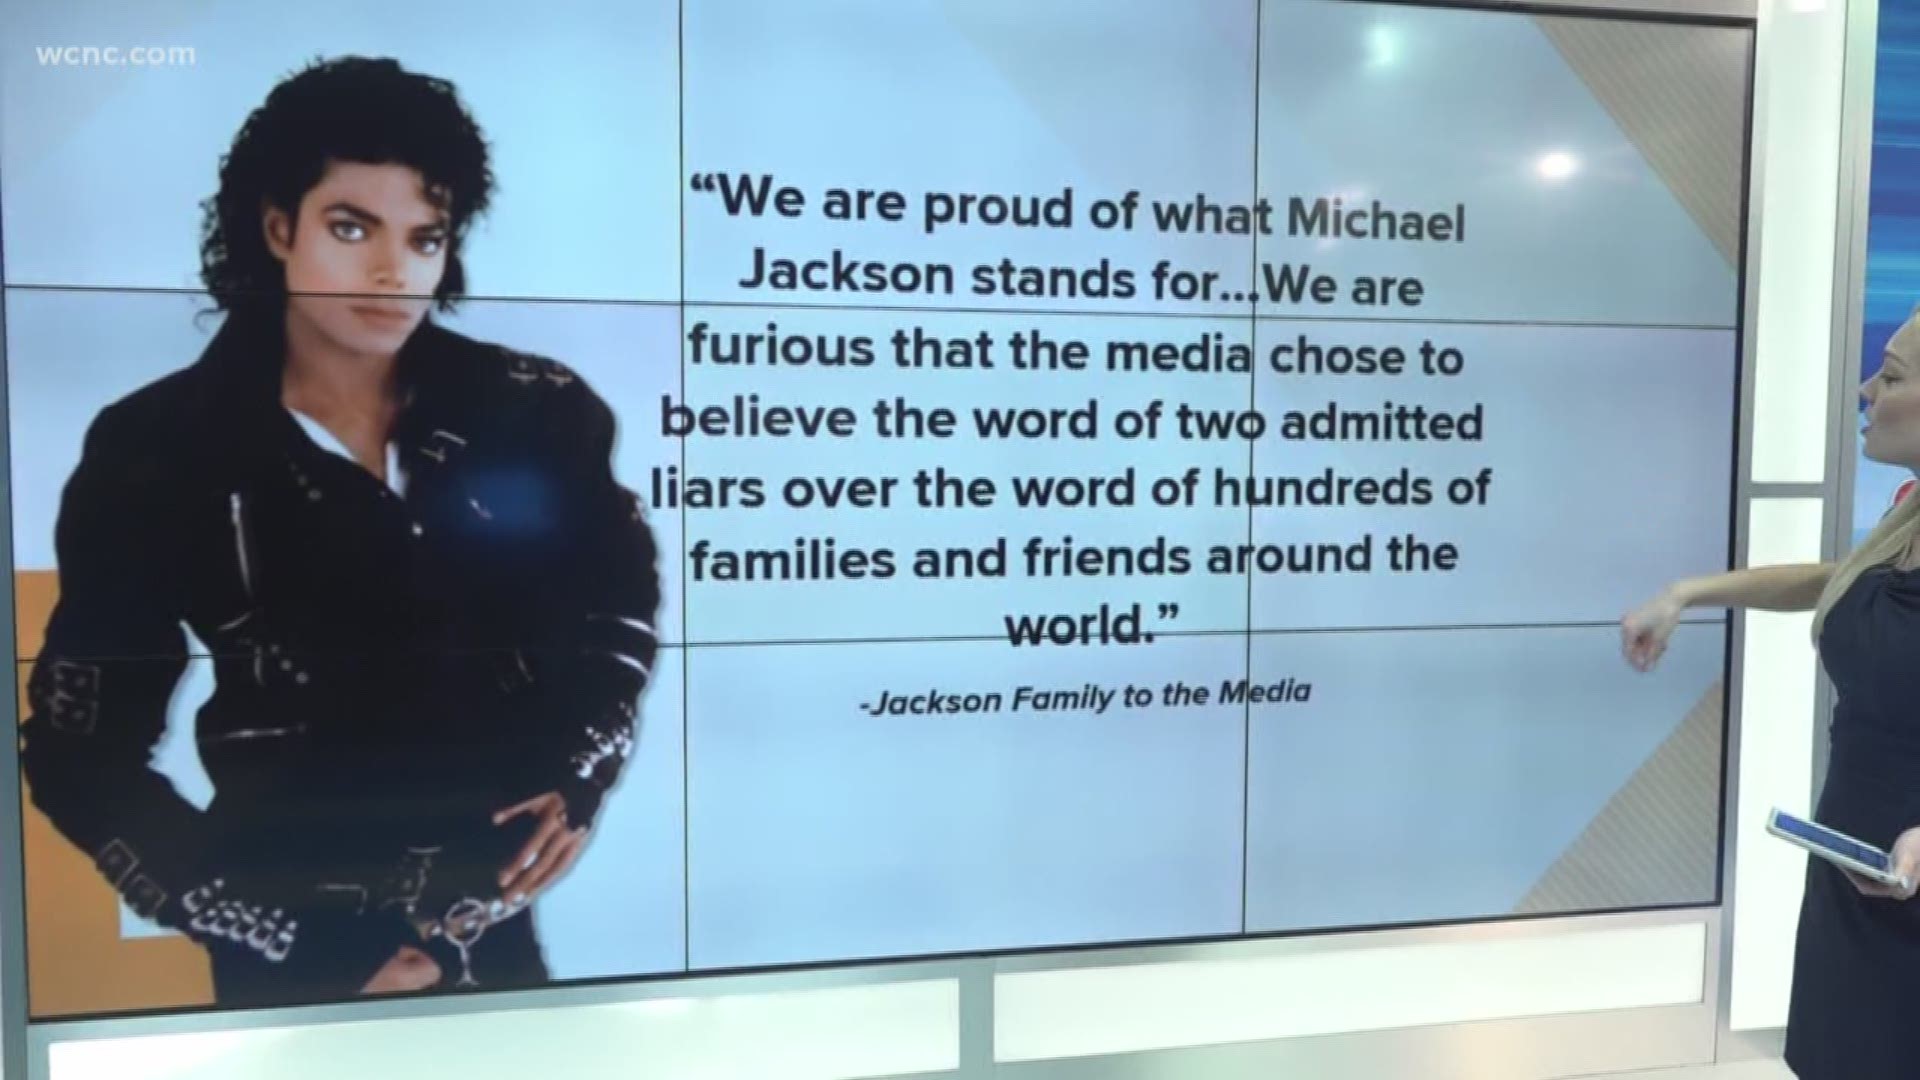 The family of Michael Jackson has filed a $100 million lawsuit against HBO over plans to air a documentary titled "Leaving Neverland," which features two men who claim Jackson sexually abused them when they were children.